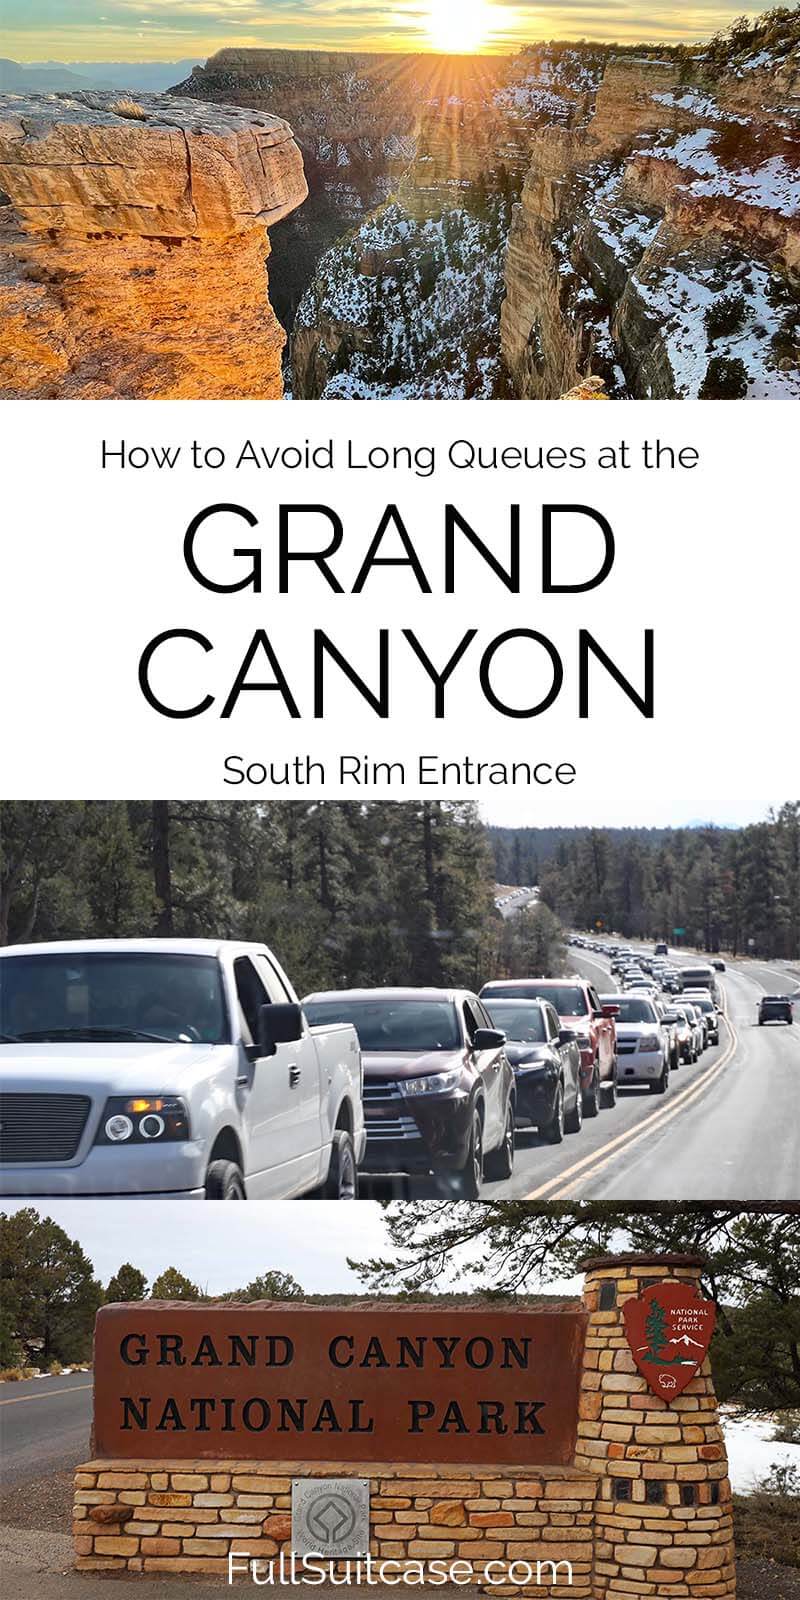 How to avoid long queues at the Grand Canyon South Rim entrance